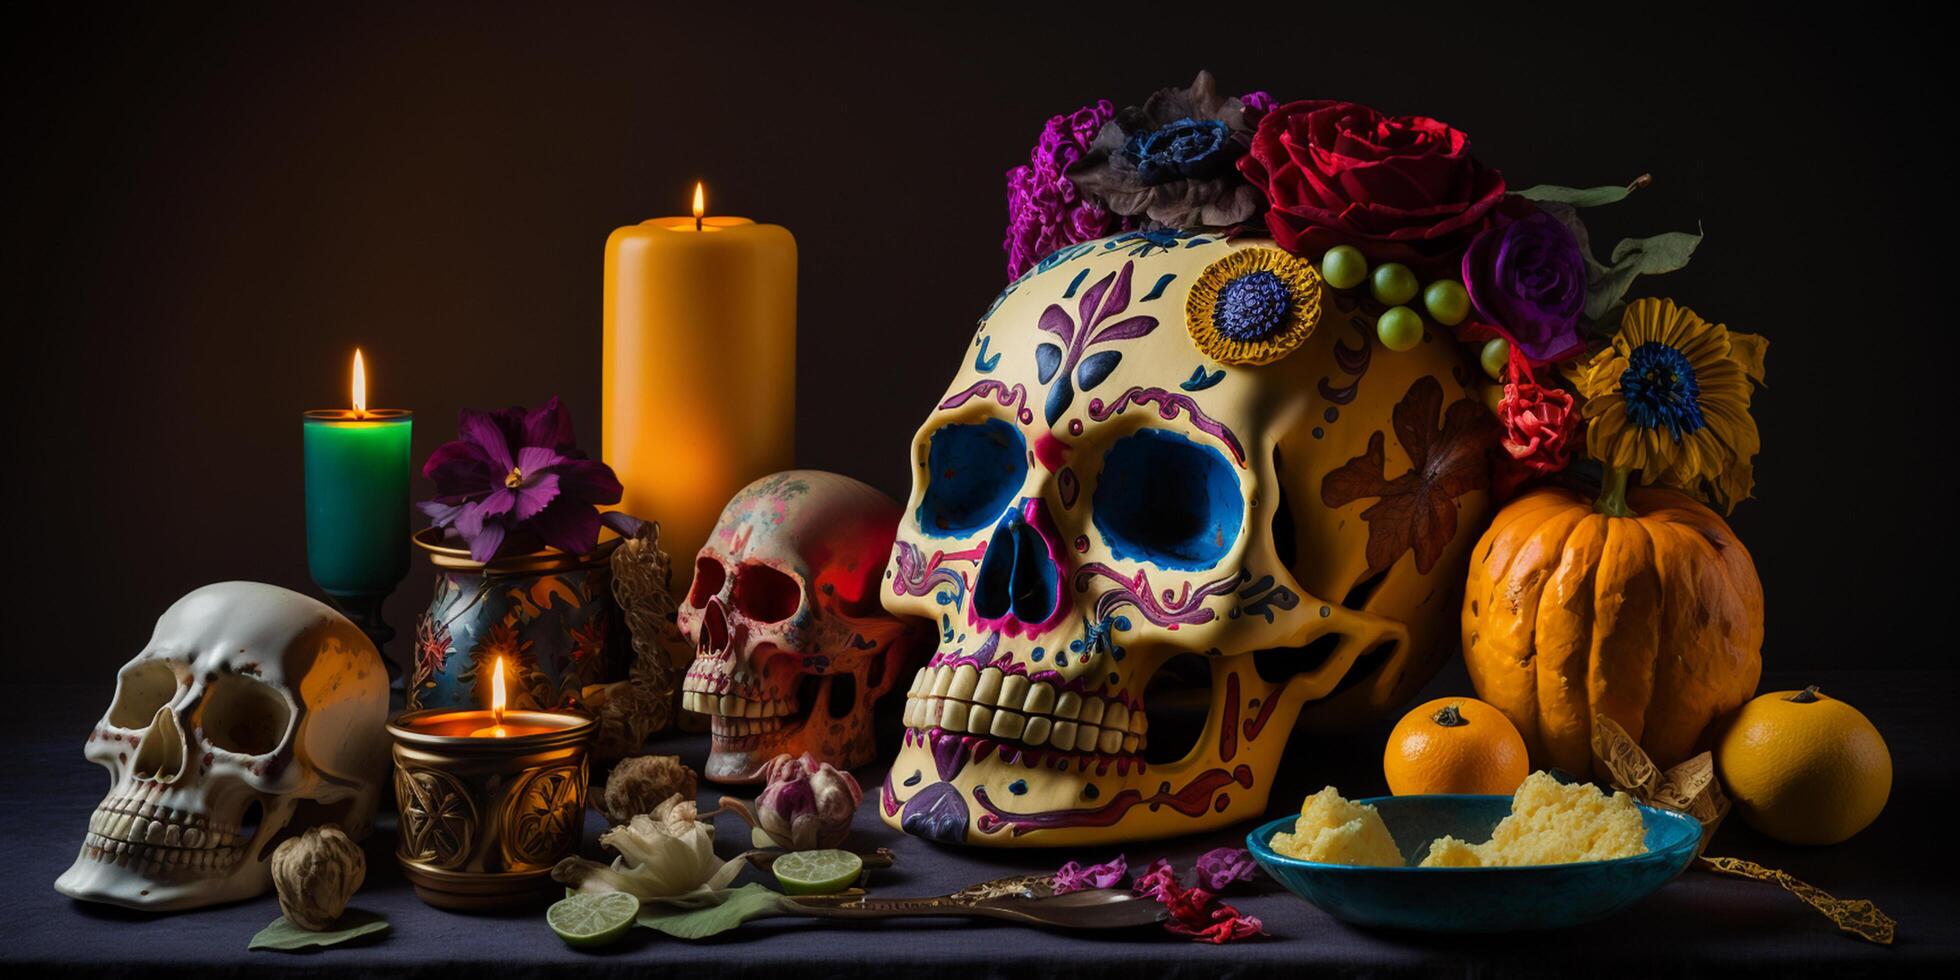 Vibrant Colorful Still Life of Decorated Skulls with Pumpkins, Candles and Traditional Mexican Decor Celebrating Day of the Dead - Dia de Muertos photo